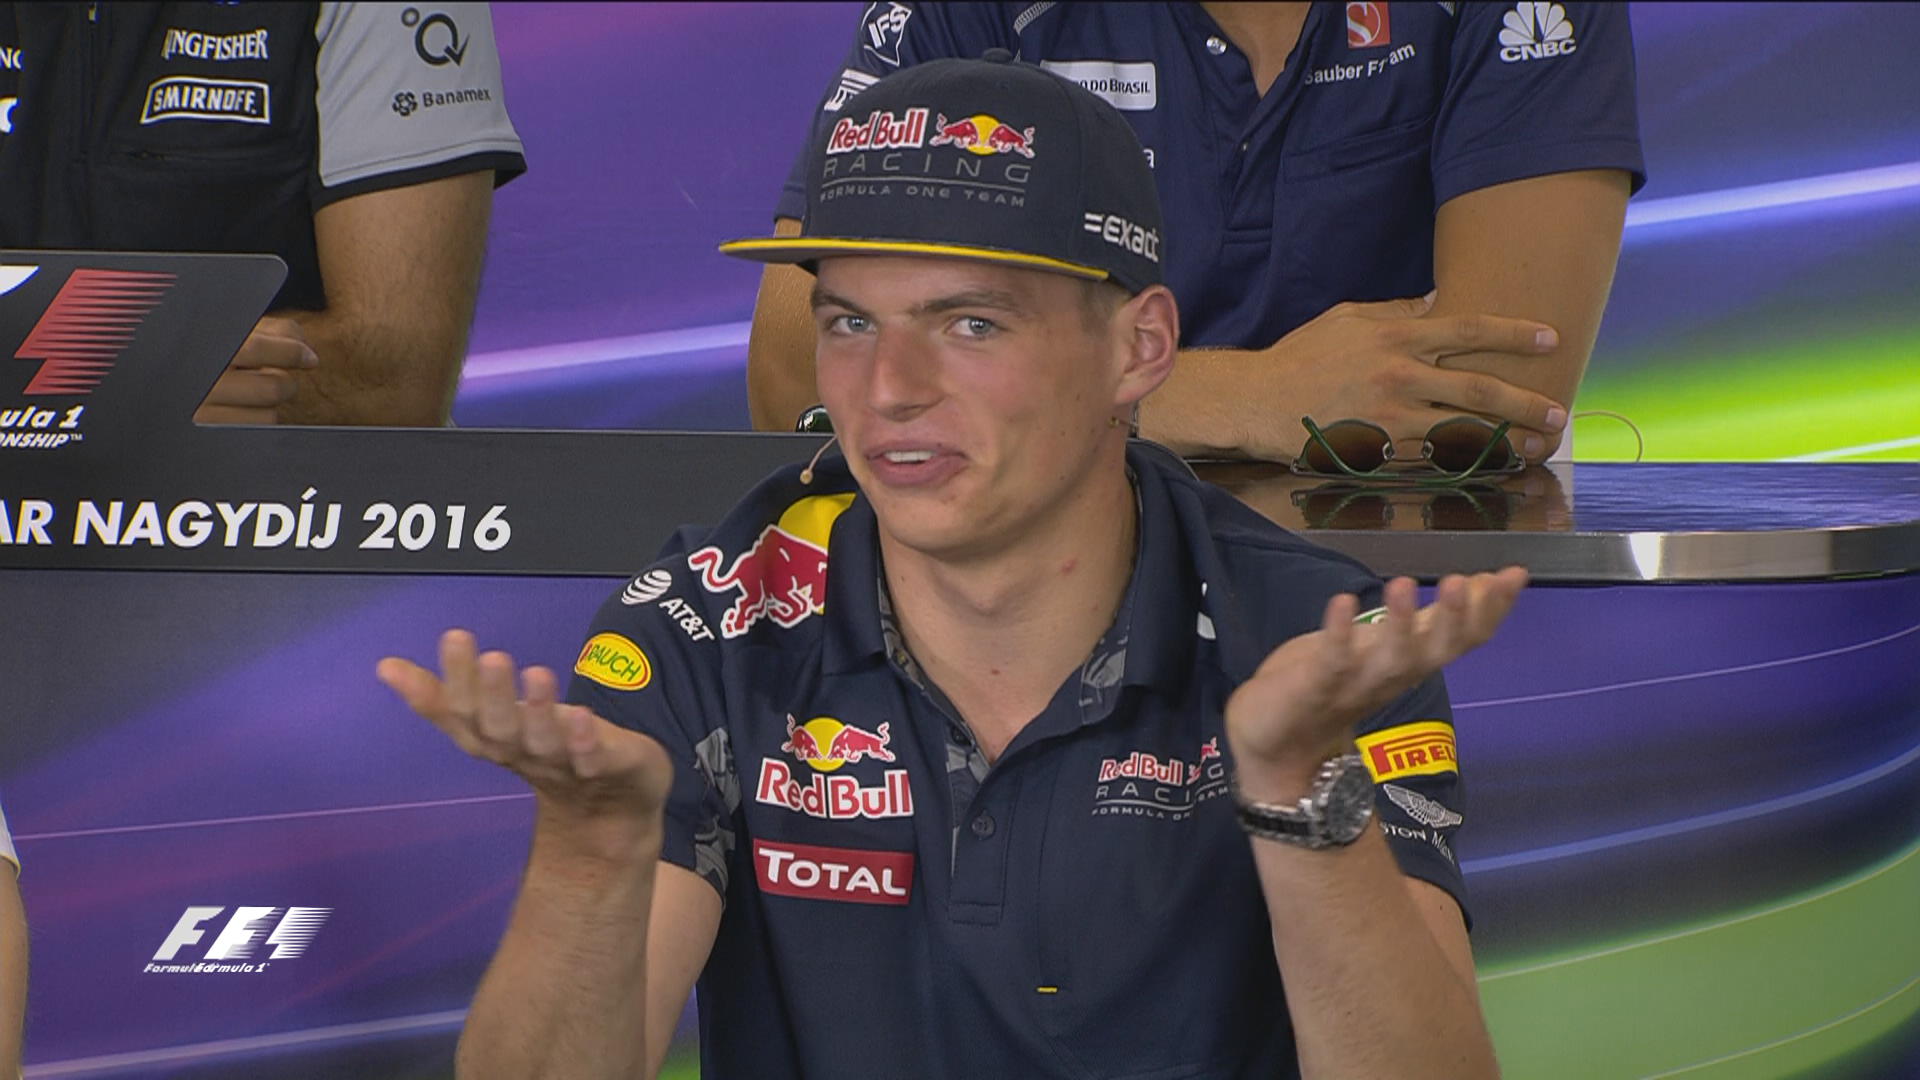 High Quality Max Verstappen F1 Hungary 2016 Thursday Press Conference Blank Meme Template